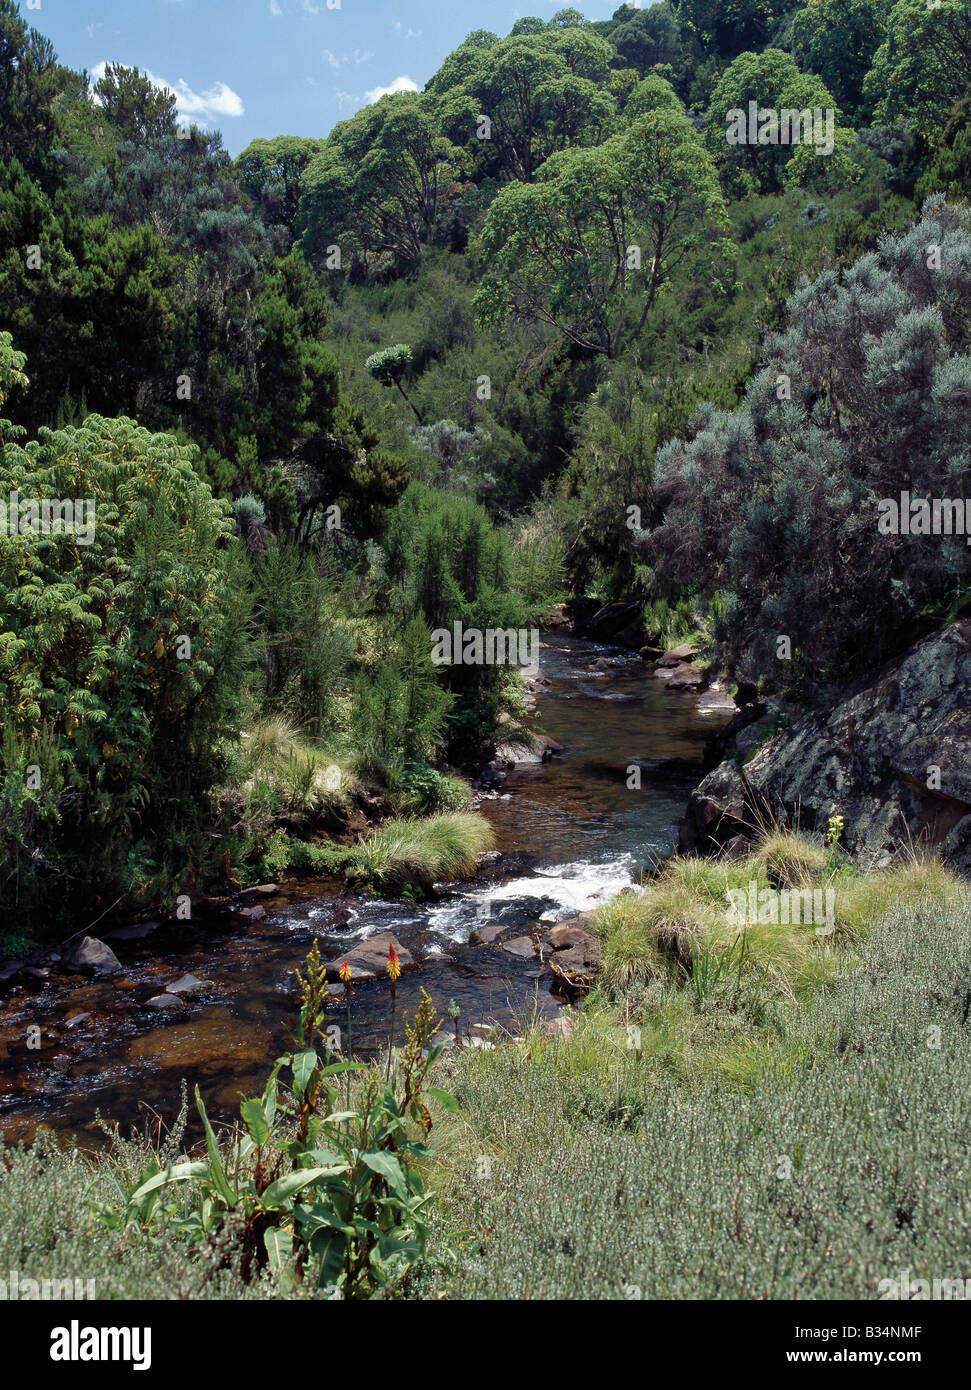 Kenya, Central Province, Aberdare National Park. A mountain stream on the 10,000-foot-high moorlands. Stock Photo